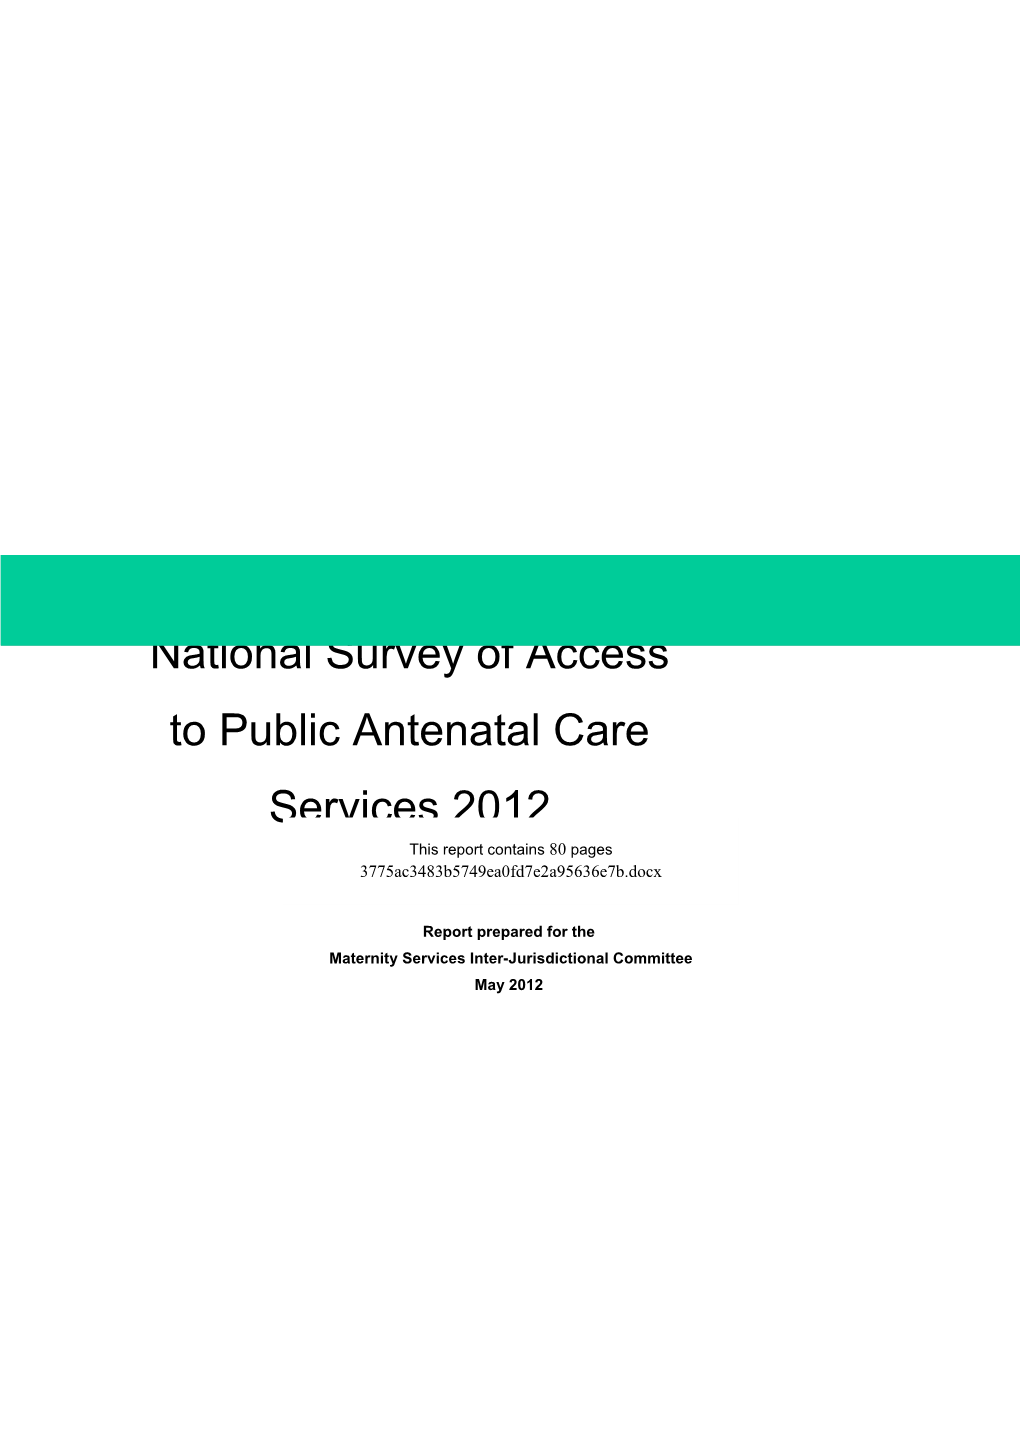 National Survey of Access to Public Antenatal Care Services 2012